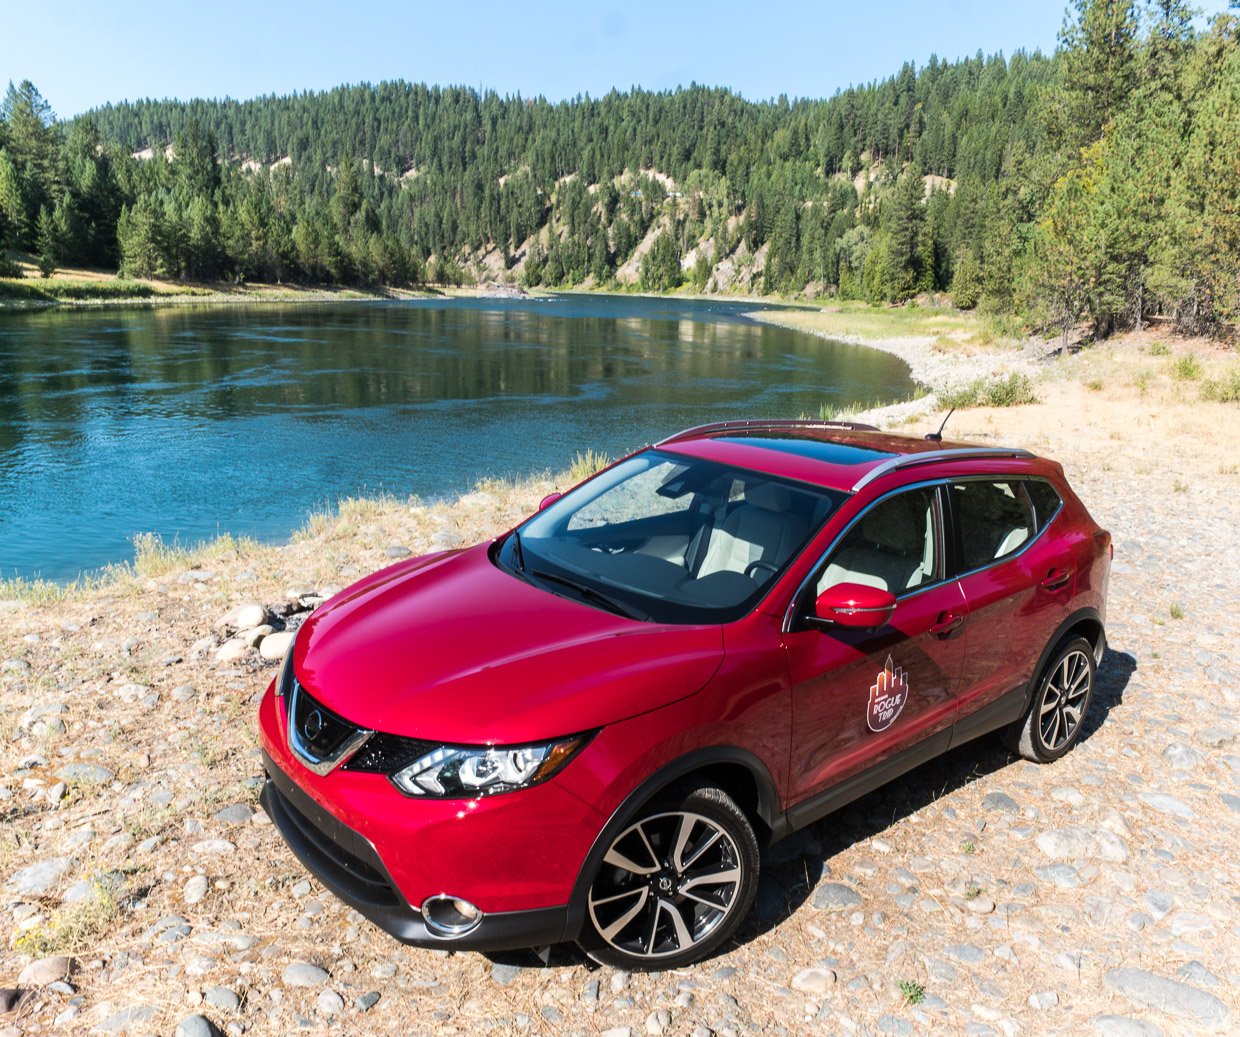 Our Awesome Nissan Rogue Trip